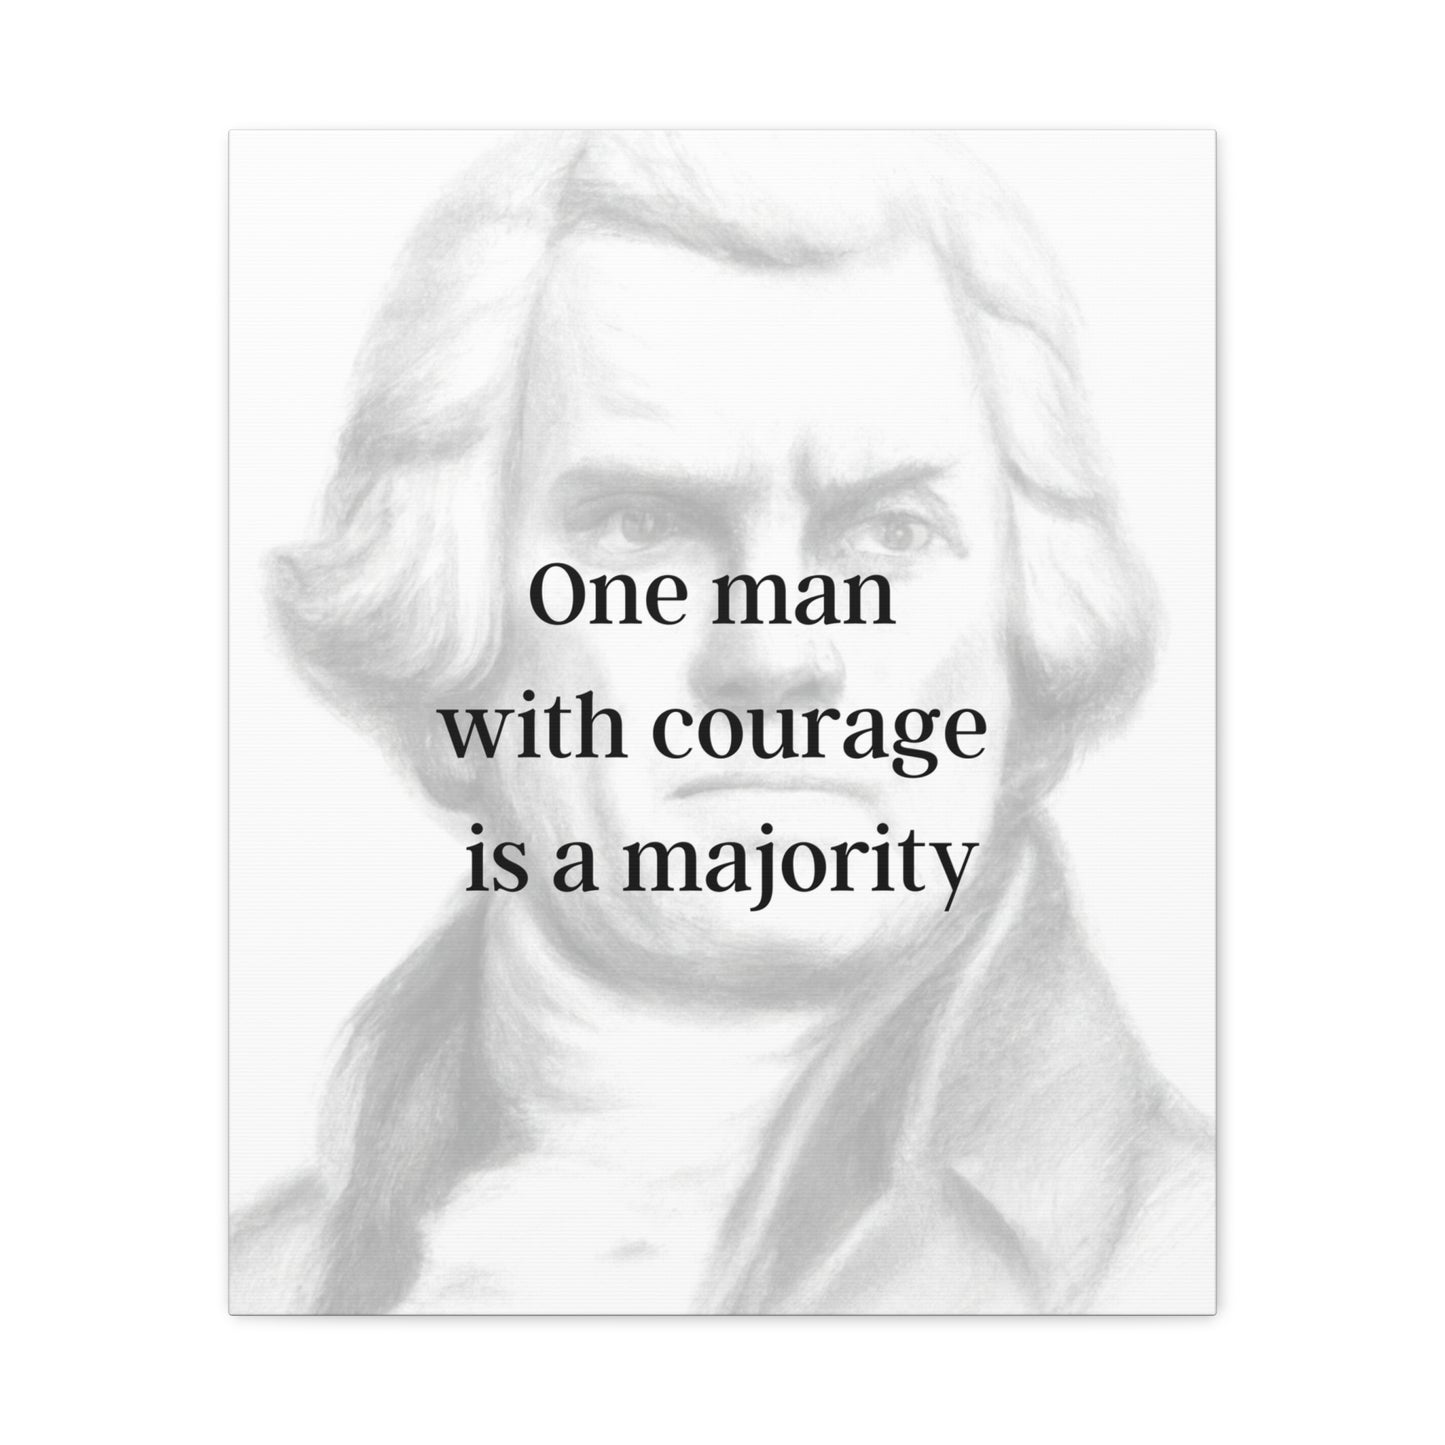 Thomas Jefferson Quote 4, Canvas Art, Light Print, 3rd President of the United States, American Patriots, AI Art, Political Art, Canvas Prints, Presidential Portraits, Presidential Quotes, Inspirational Quotes